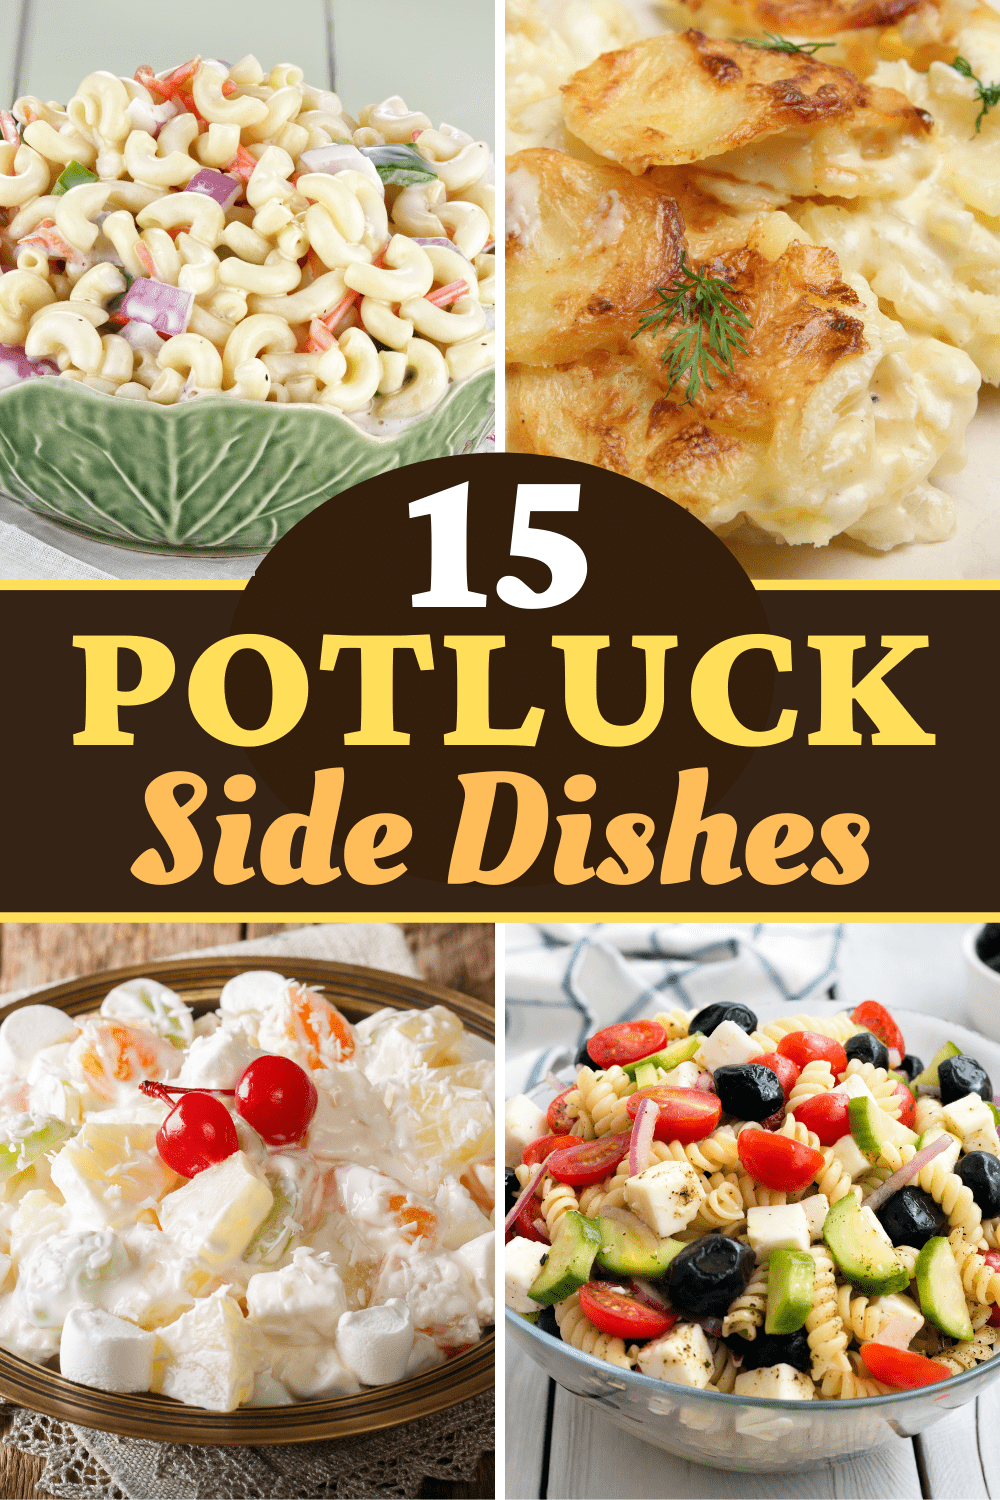 15 Best Potluck Side Dishes for Sharing - Insanely Good